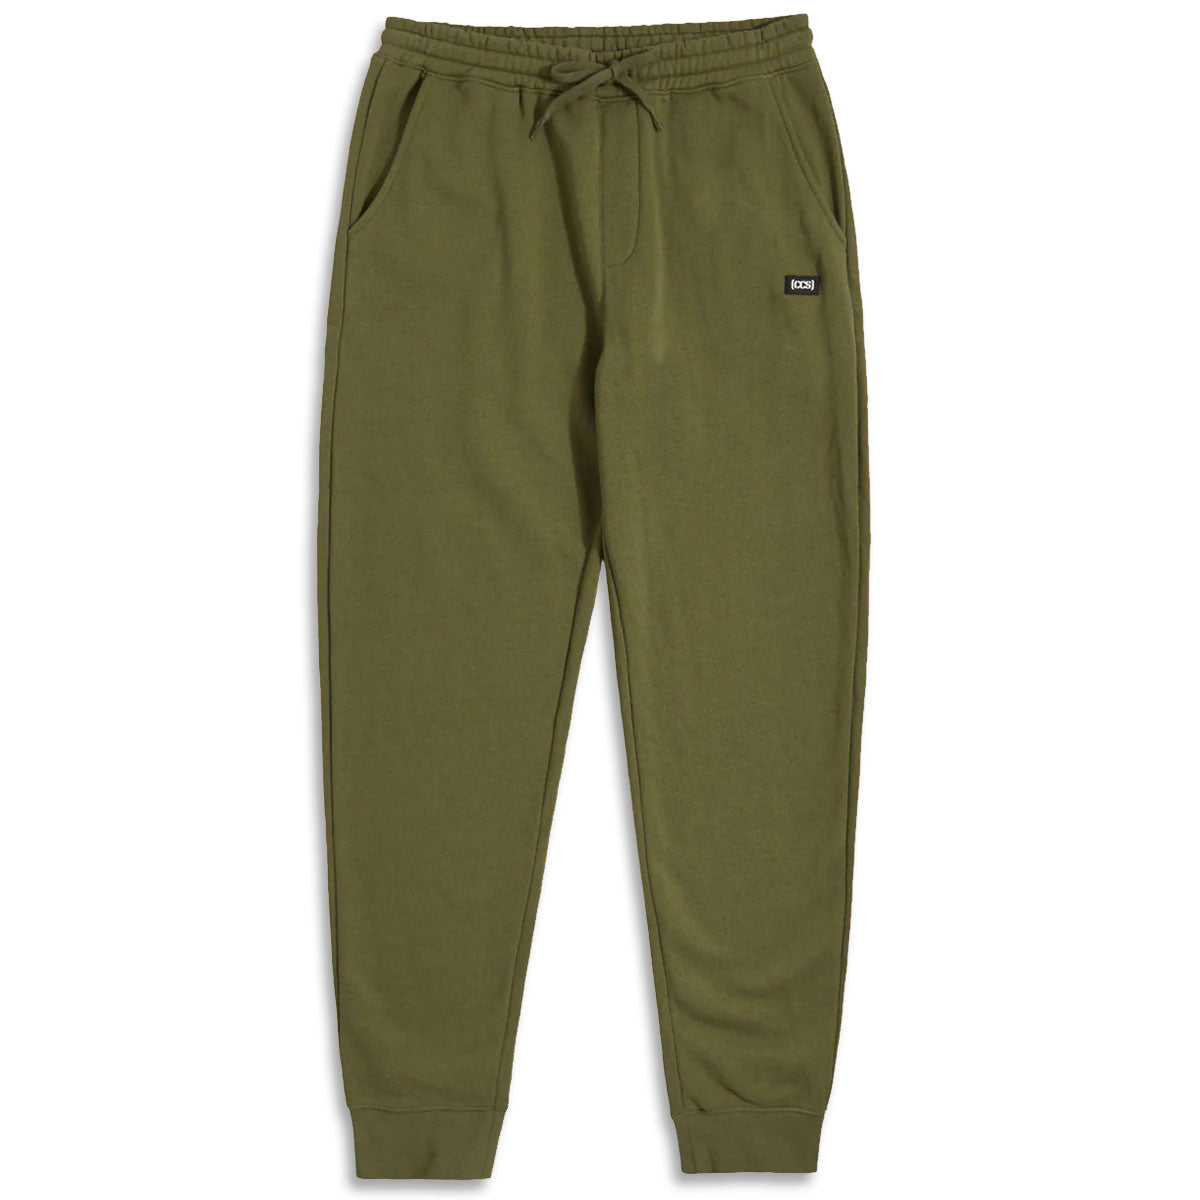 CCS Logo Rubber Patch Sweat Pants - Army Green image 1